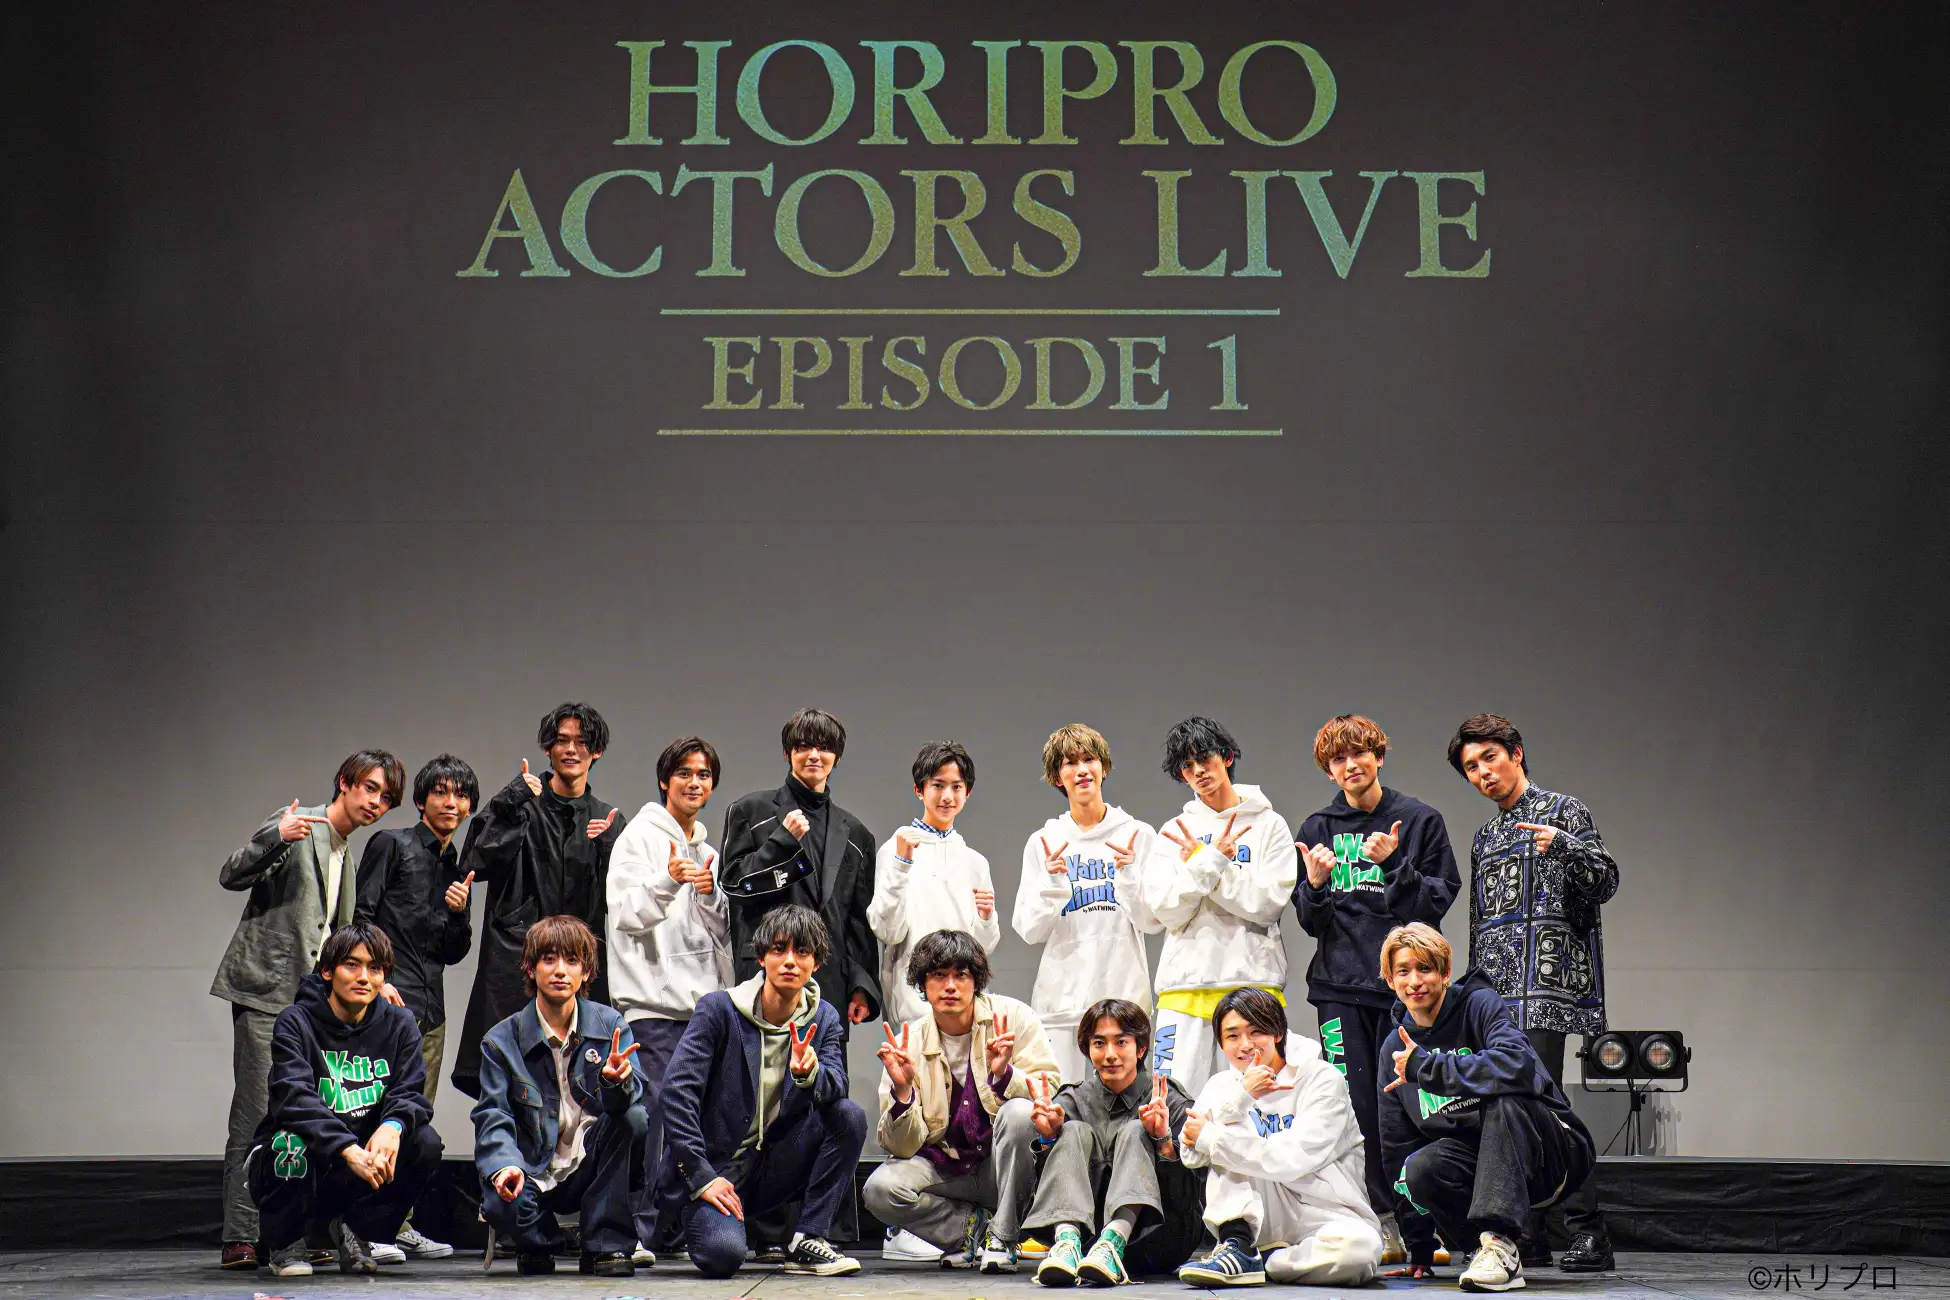 Stage production of Harry Potter and the Cursed Child as Albus Potter - Haru as Scorpius Malfoy - Rio Saito on Horipro Actors Liven.